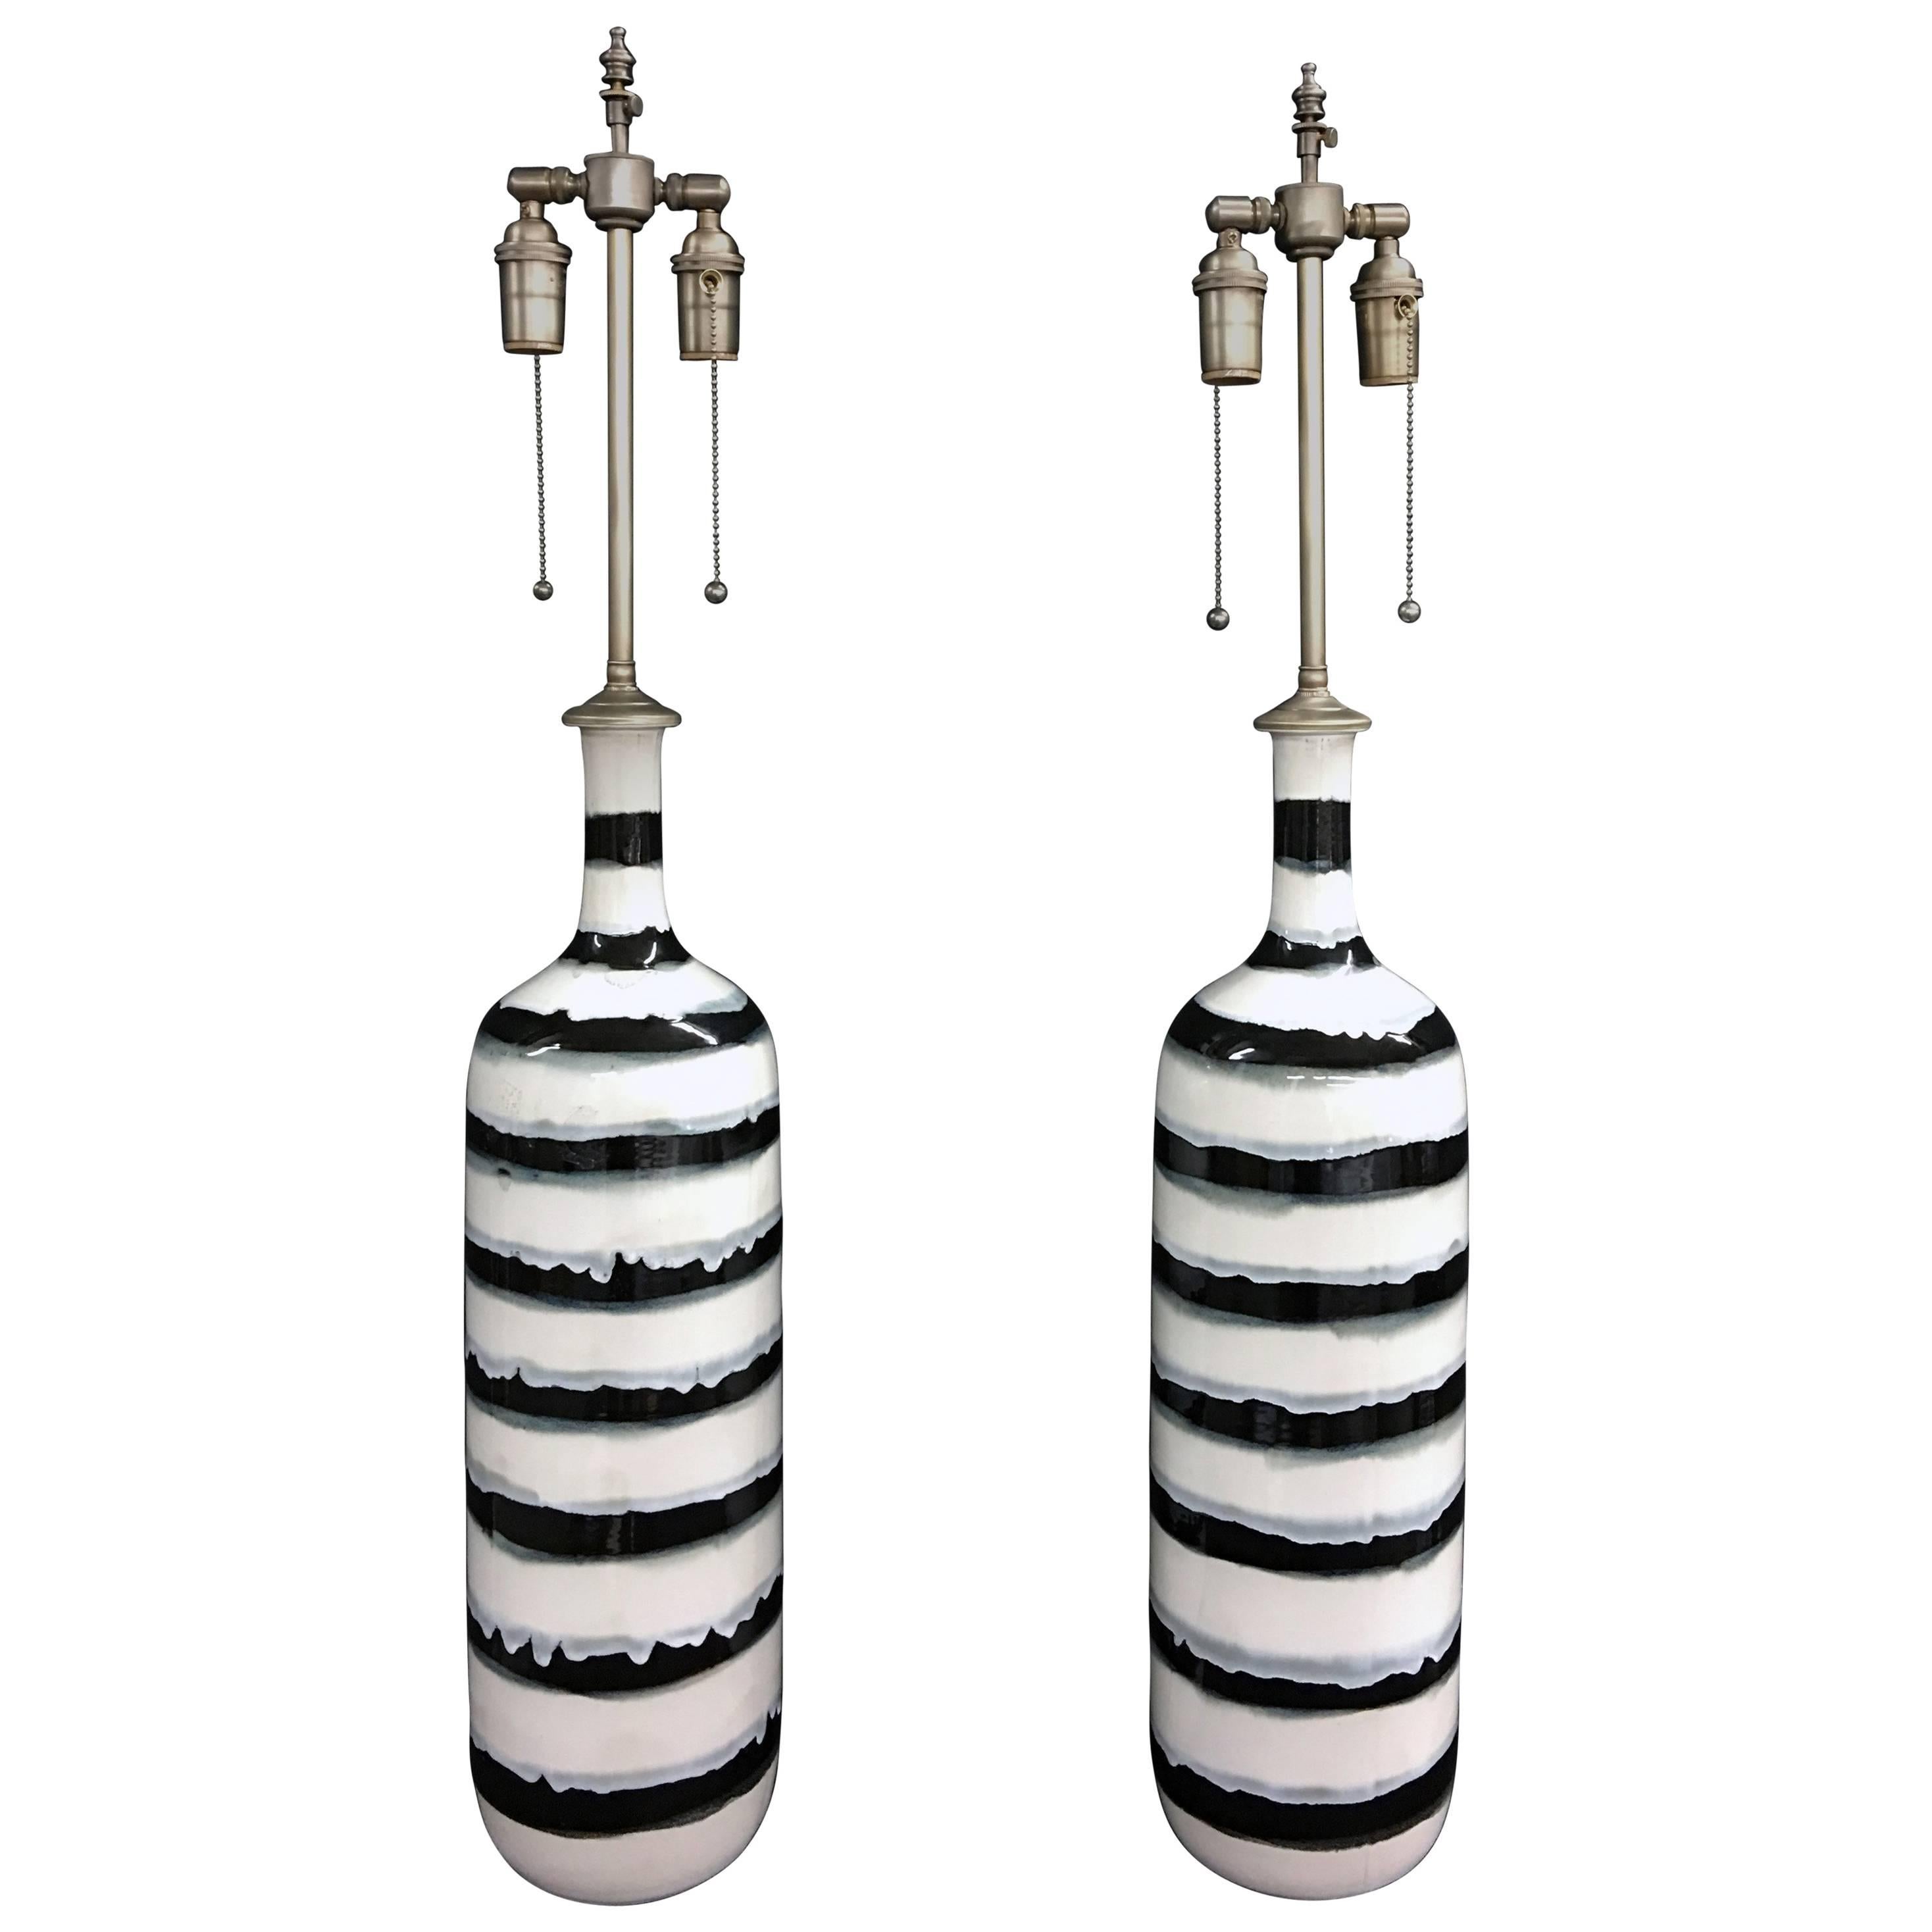 Unique Pair of Tall Hand-Painted and Glazed Vessels with Lamp Application